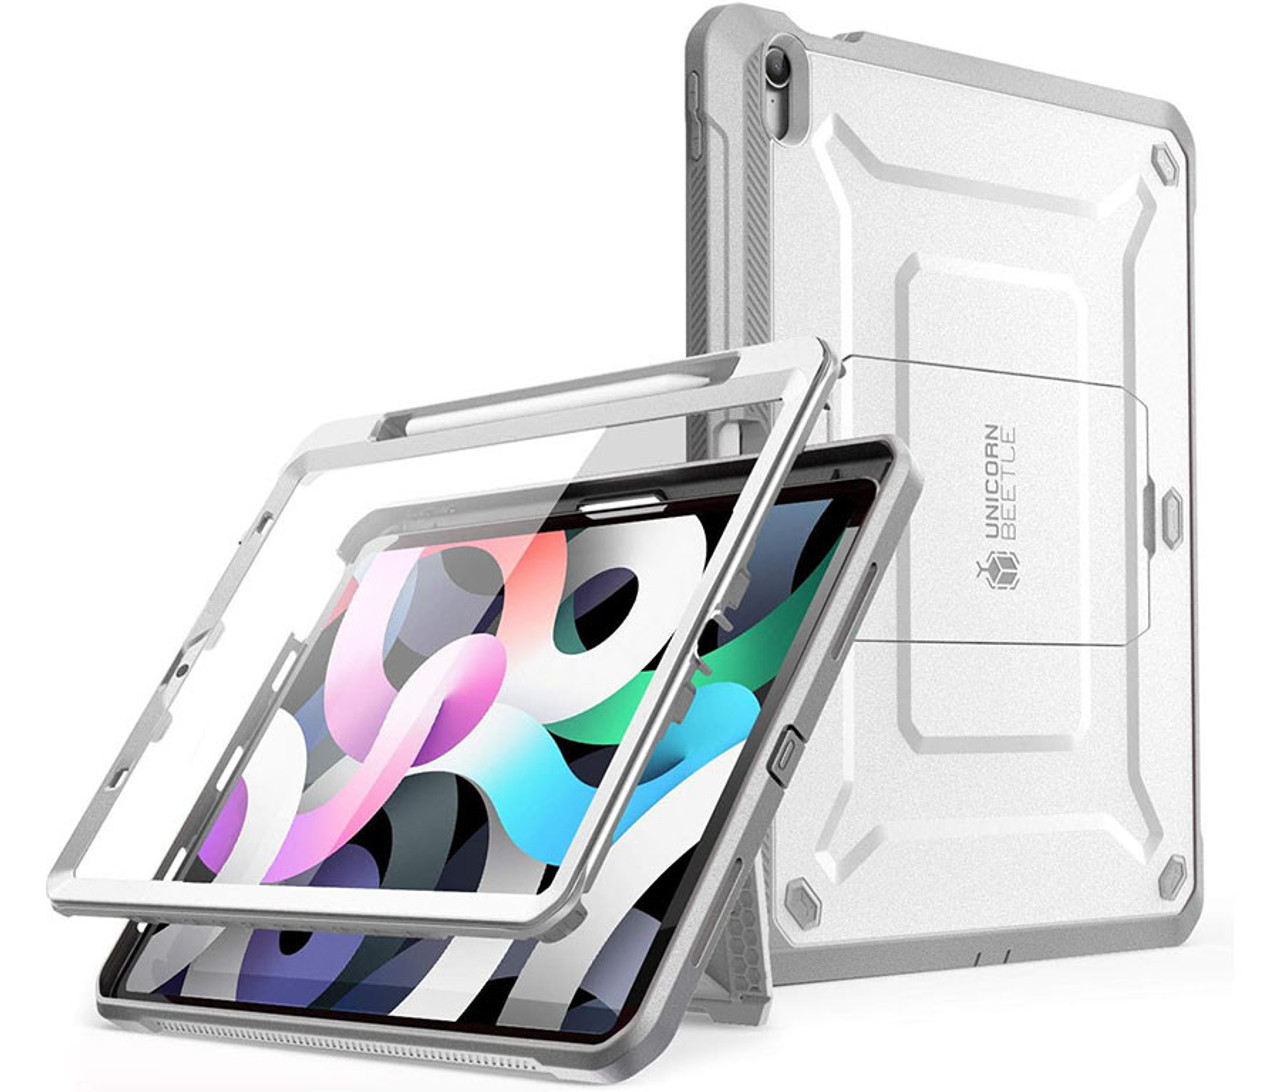 Unicorn Beetle Pro Case in white (iPad Air 5th/6th Gen version shown here)